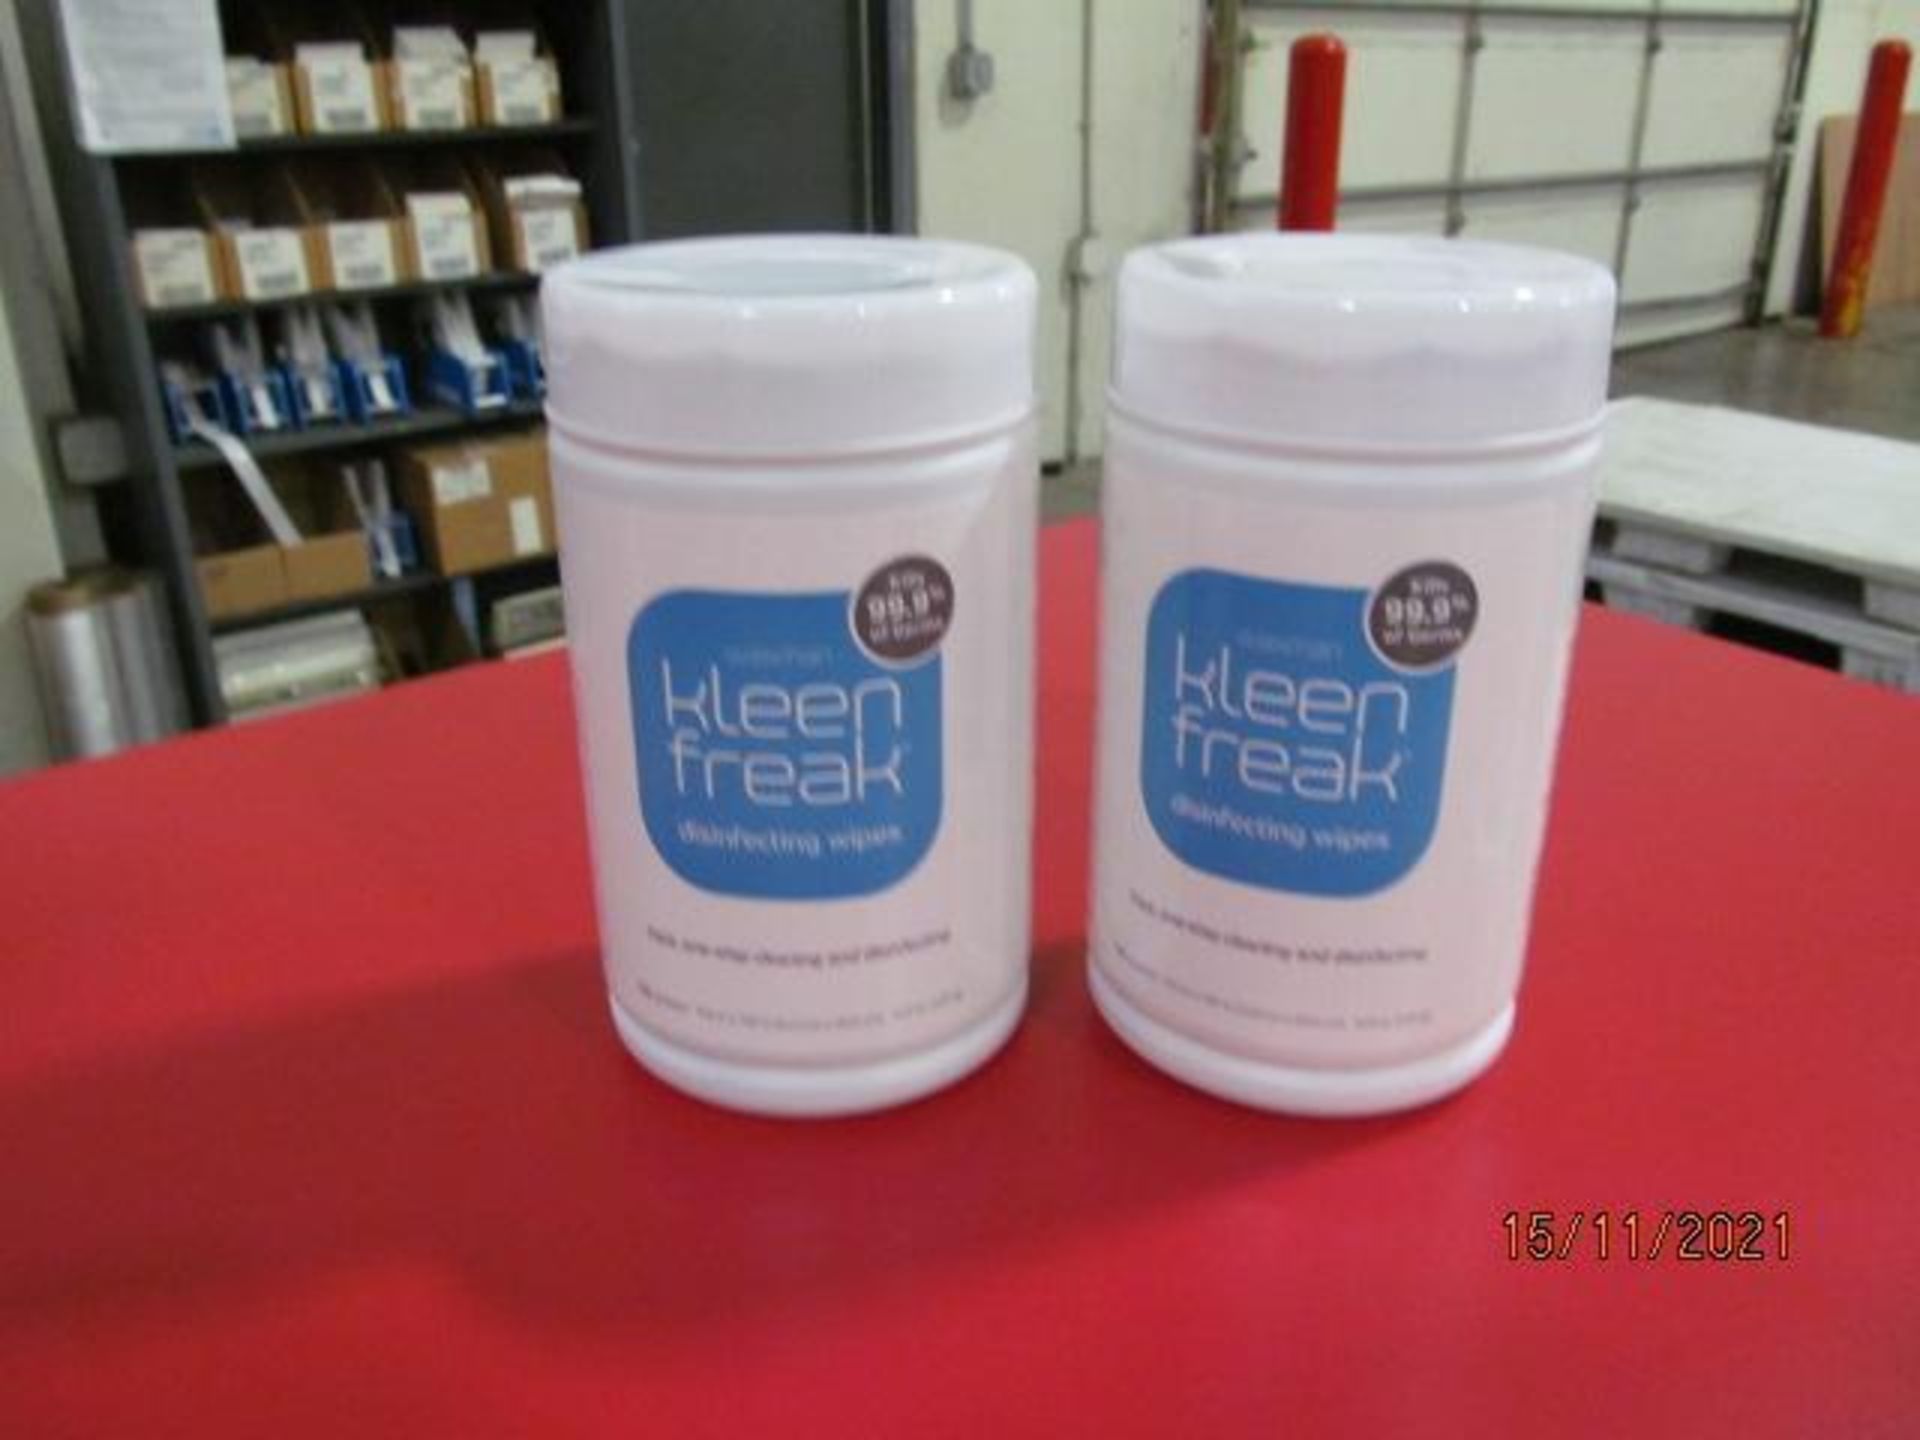 Lot of Waxman Kleen Freak Sanitizing Wipes consisting of 3,240 packages on 5 pallets. Each package c - Image 4 of 11